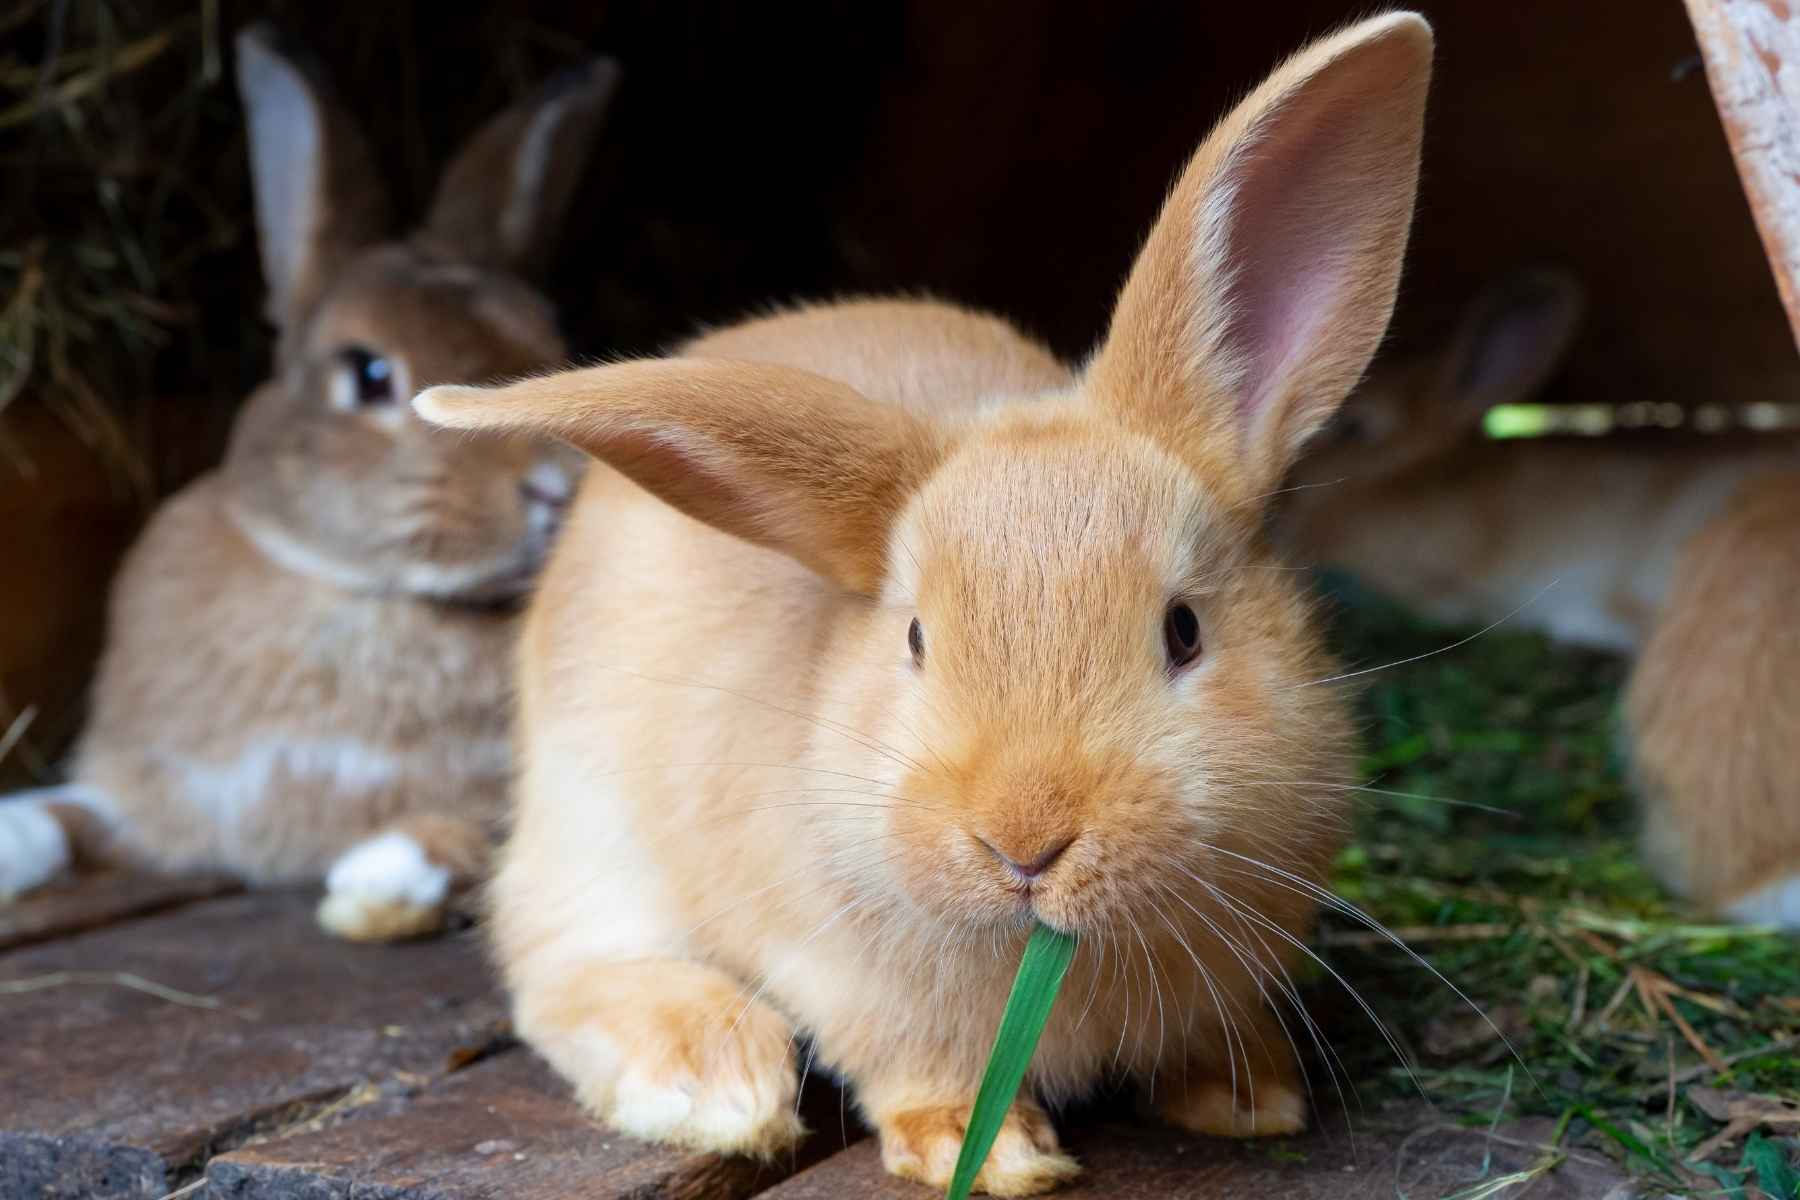 Rabbits sitting on the floor eating grass